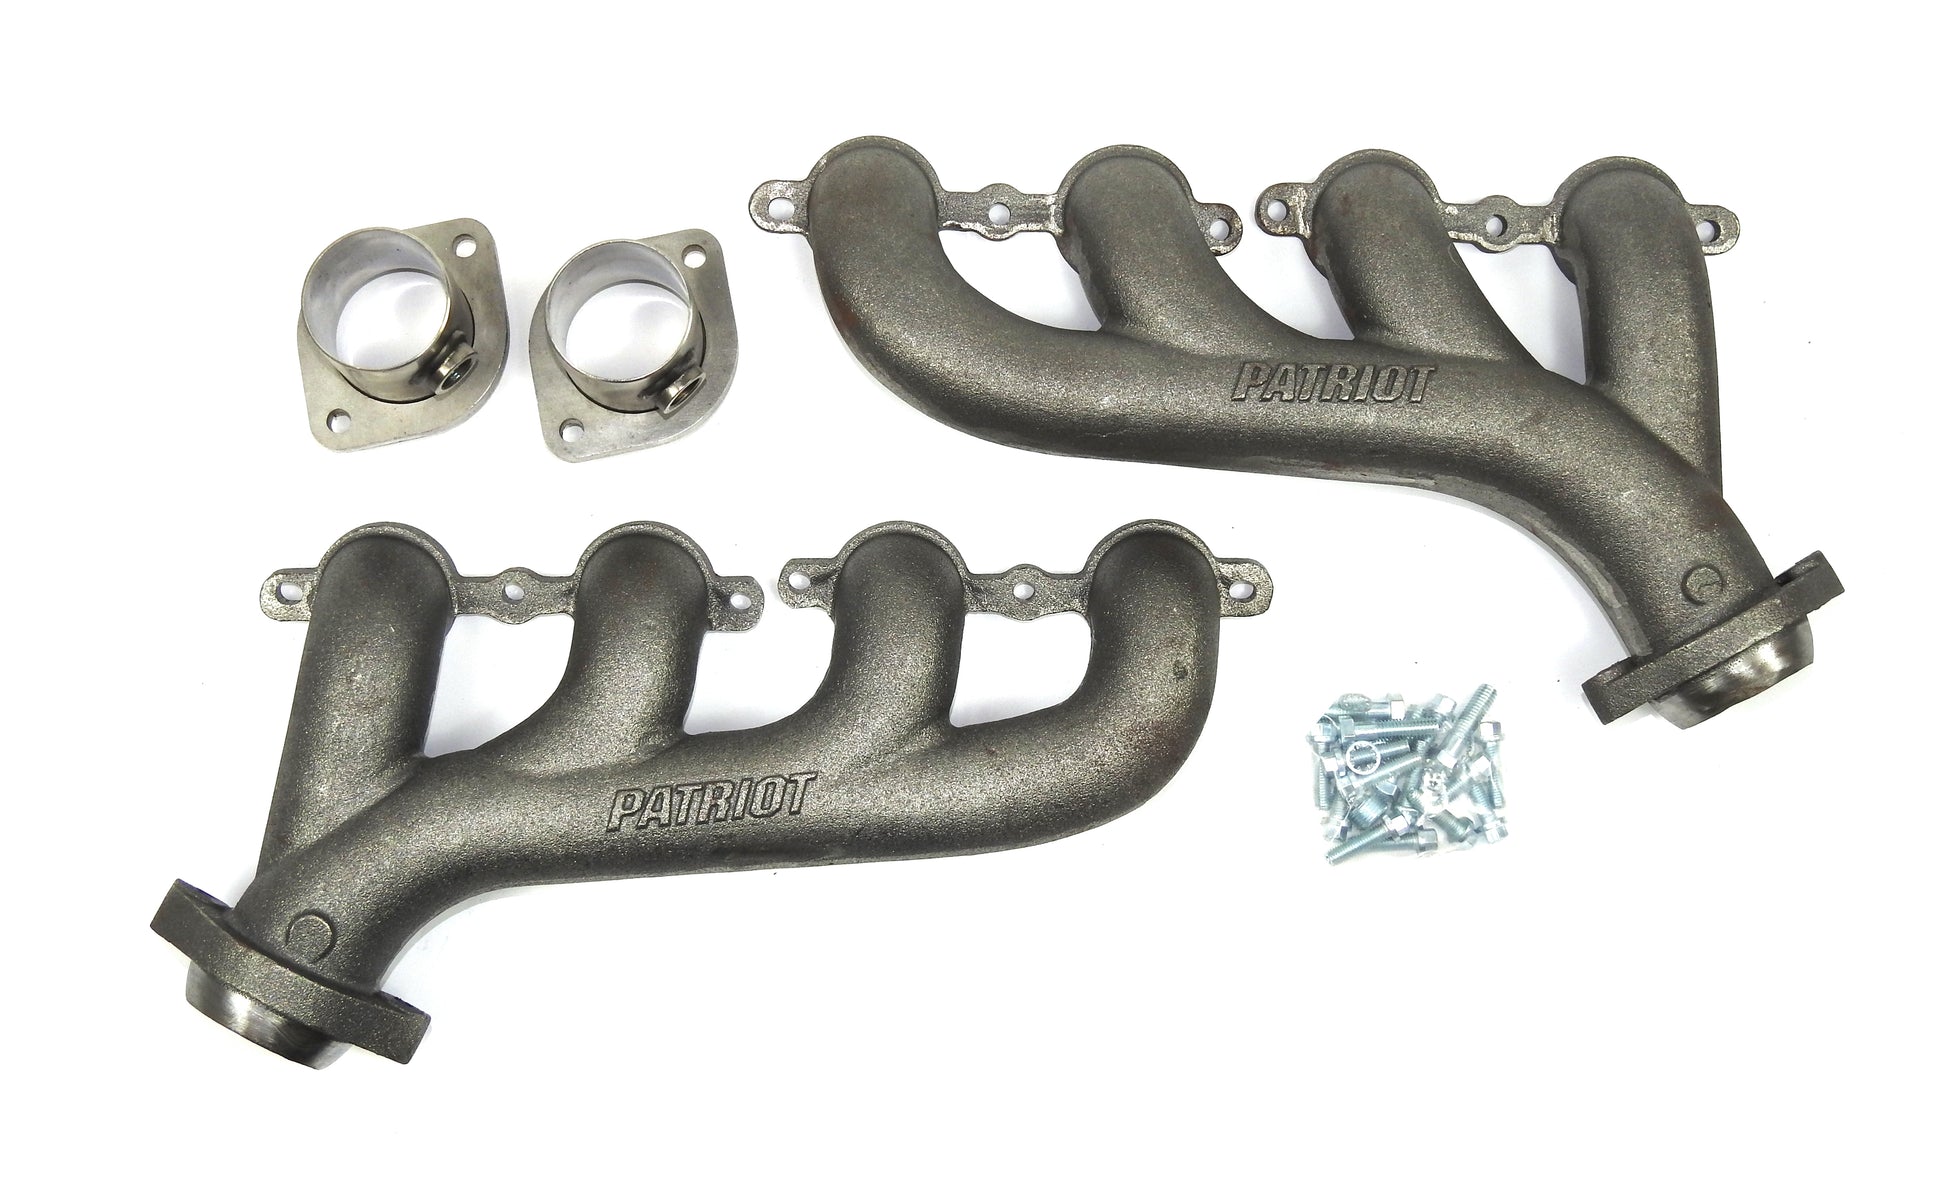 Patriot Headers H8097 1 5/8" Cast Tubular Manifolds for GM LS Engines (except LS7 and LS9) for Engine Swap applications and validated fitment on 70-81 GM F-Bodies, 82-88 GM G-Bodies and 68-72 GM A-Bodies plain natural finish